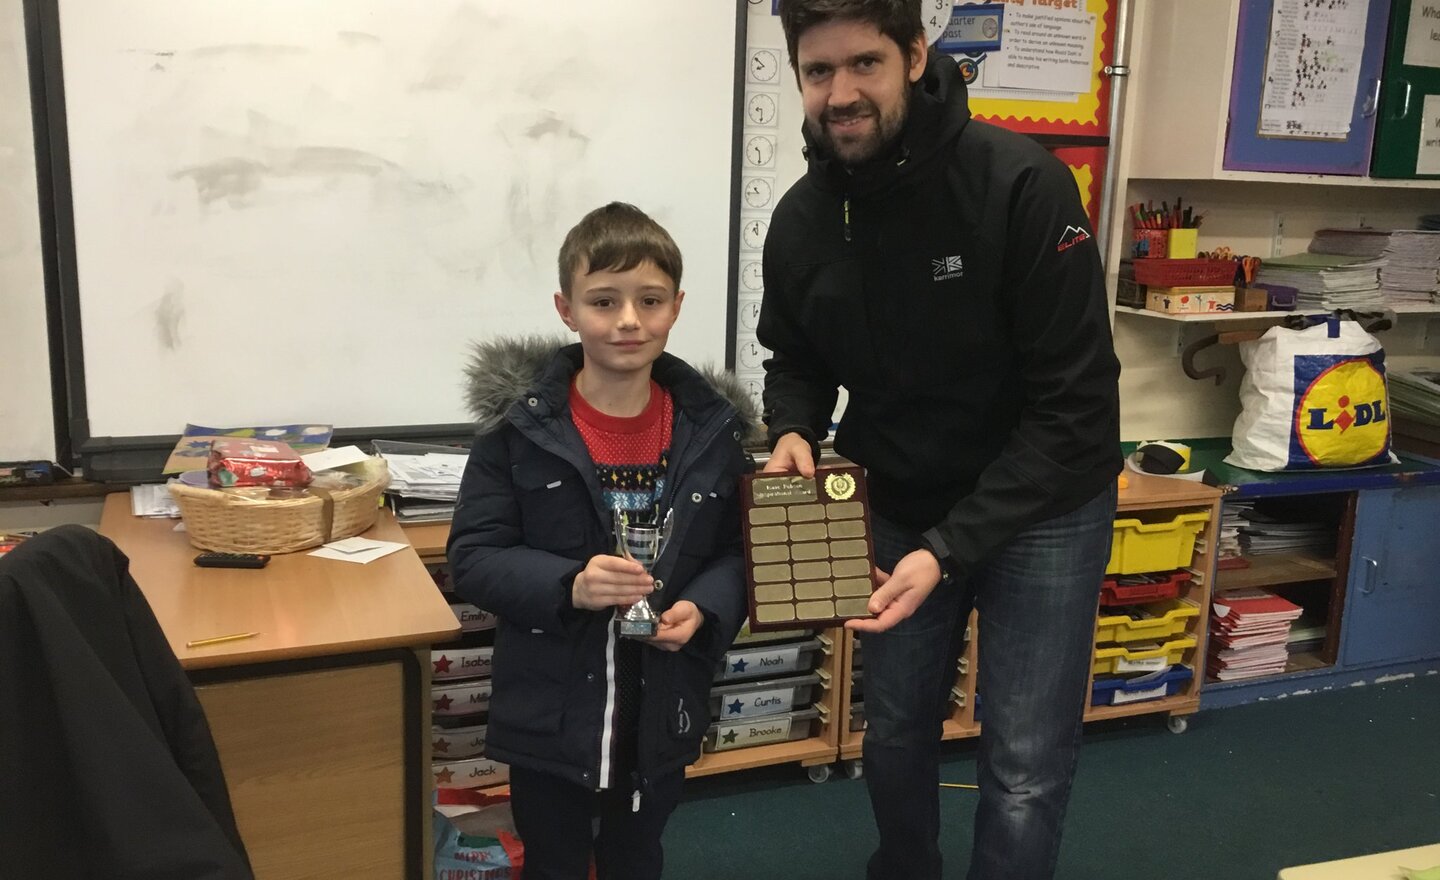 Image of Jackson Borrowdale is awarded with the new “Inspirational Person Award” donated by Isaac Robson